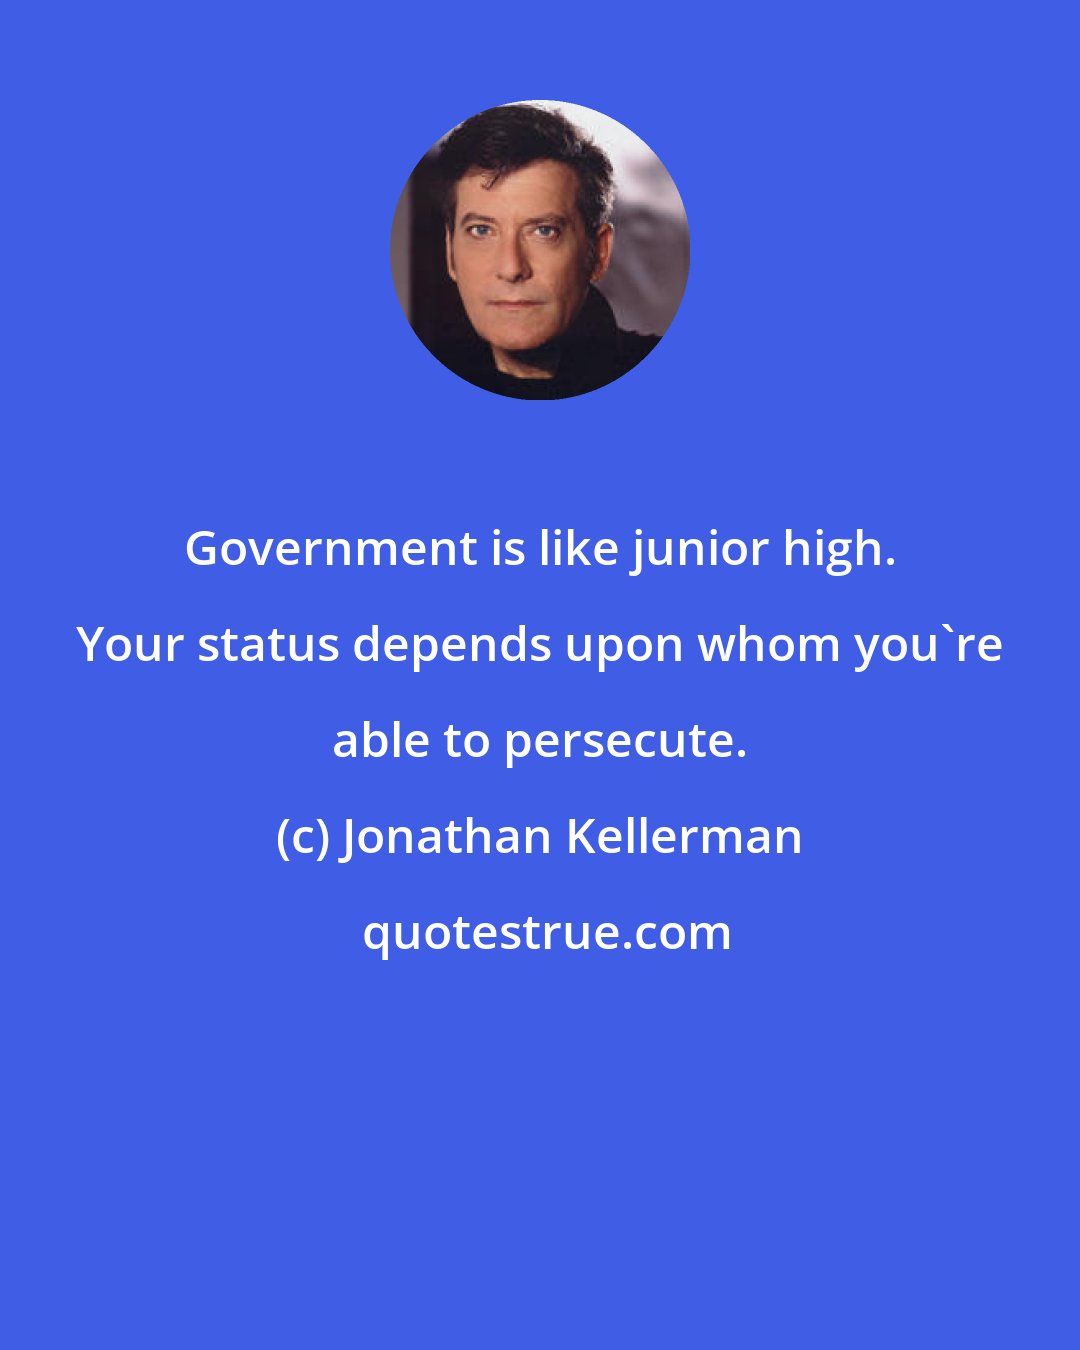 Jonathan Kellerman: Government is like junior high. Your status depends upon whom you're able to persecute.